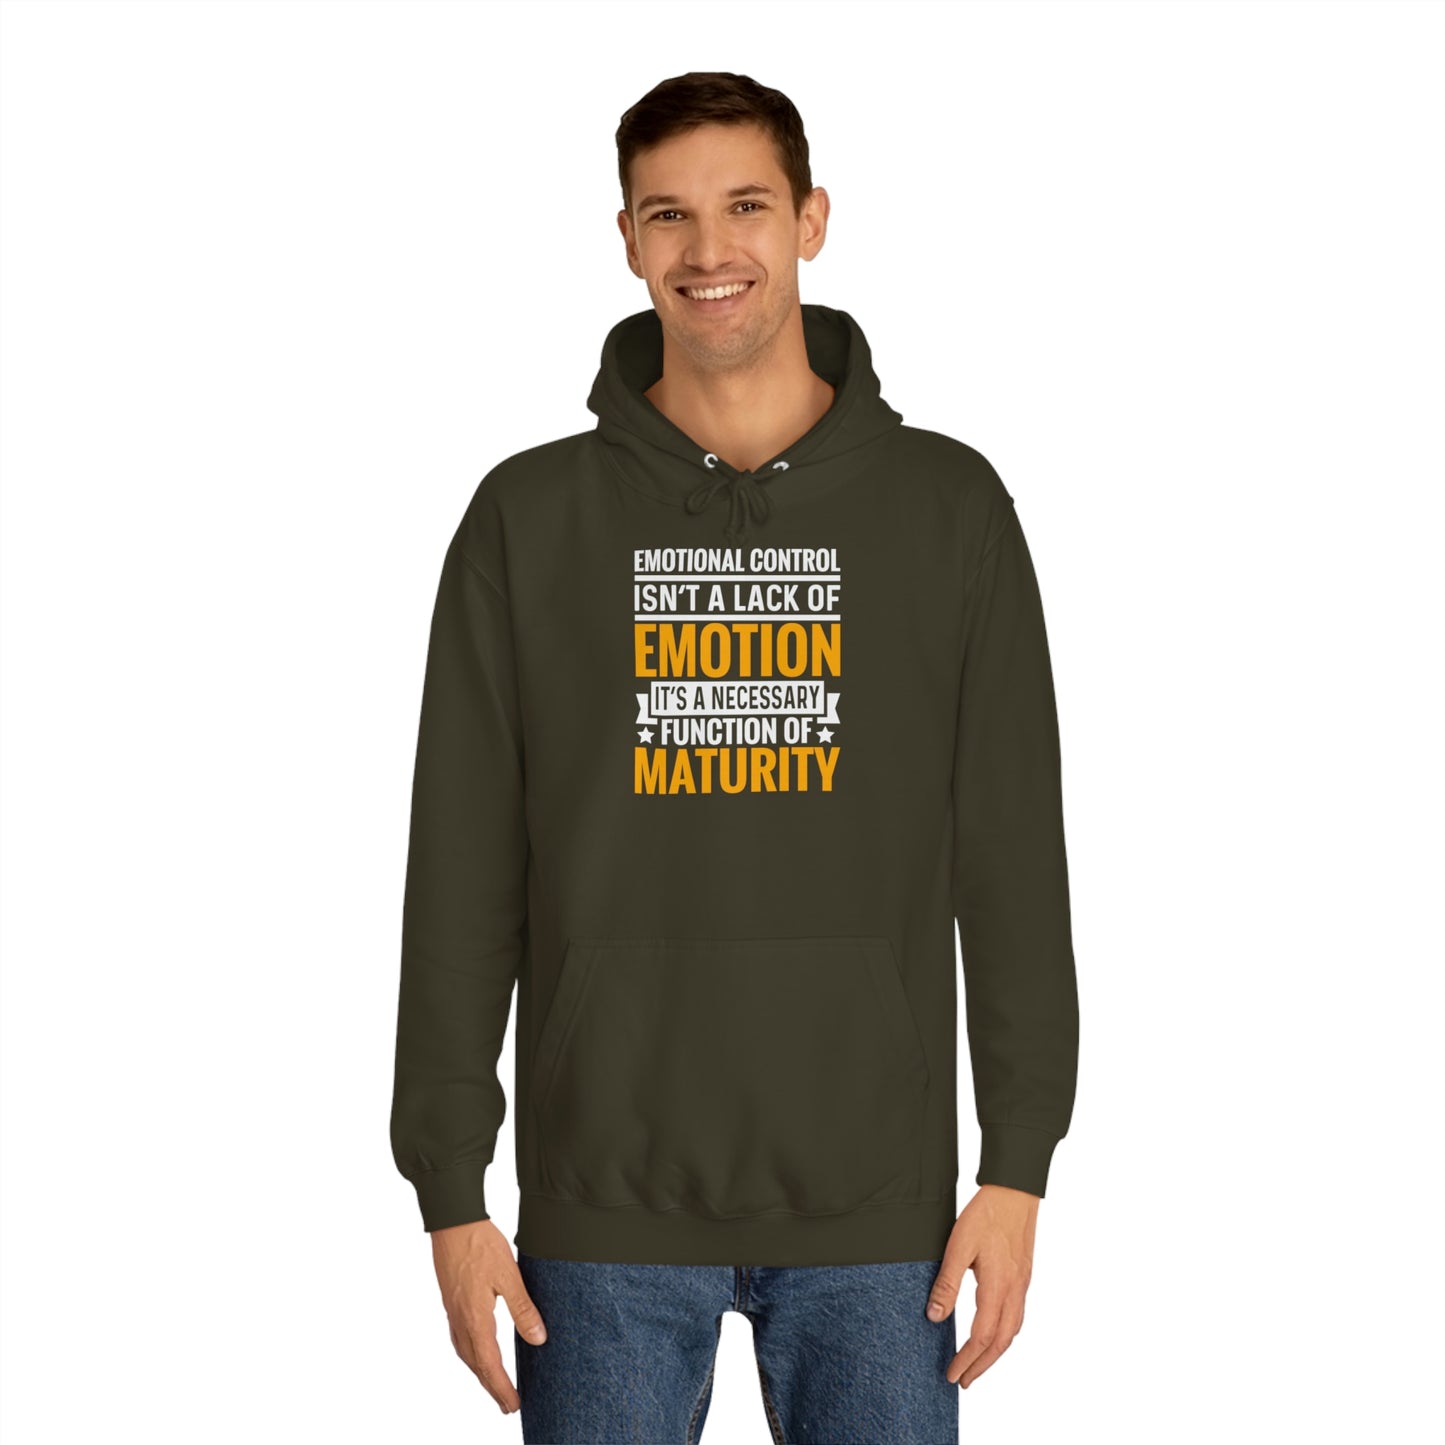 Andrew Tate Quote Hoodie: Emotions and Boost Your Self-Confidence Motivational Hoodie